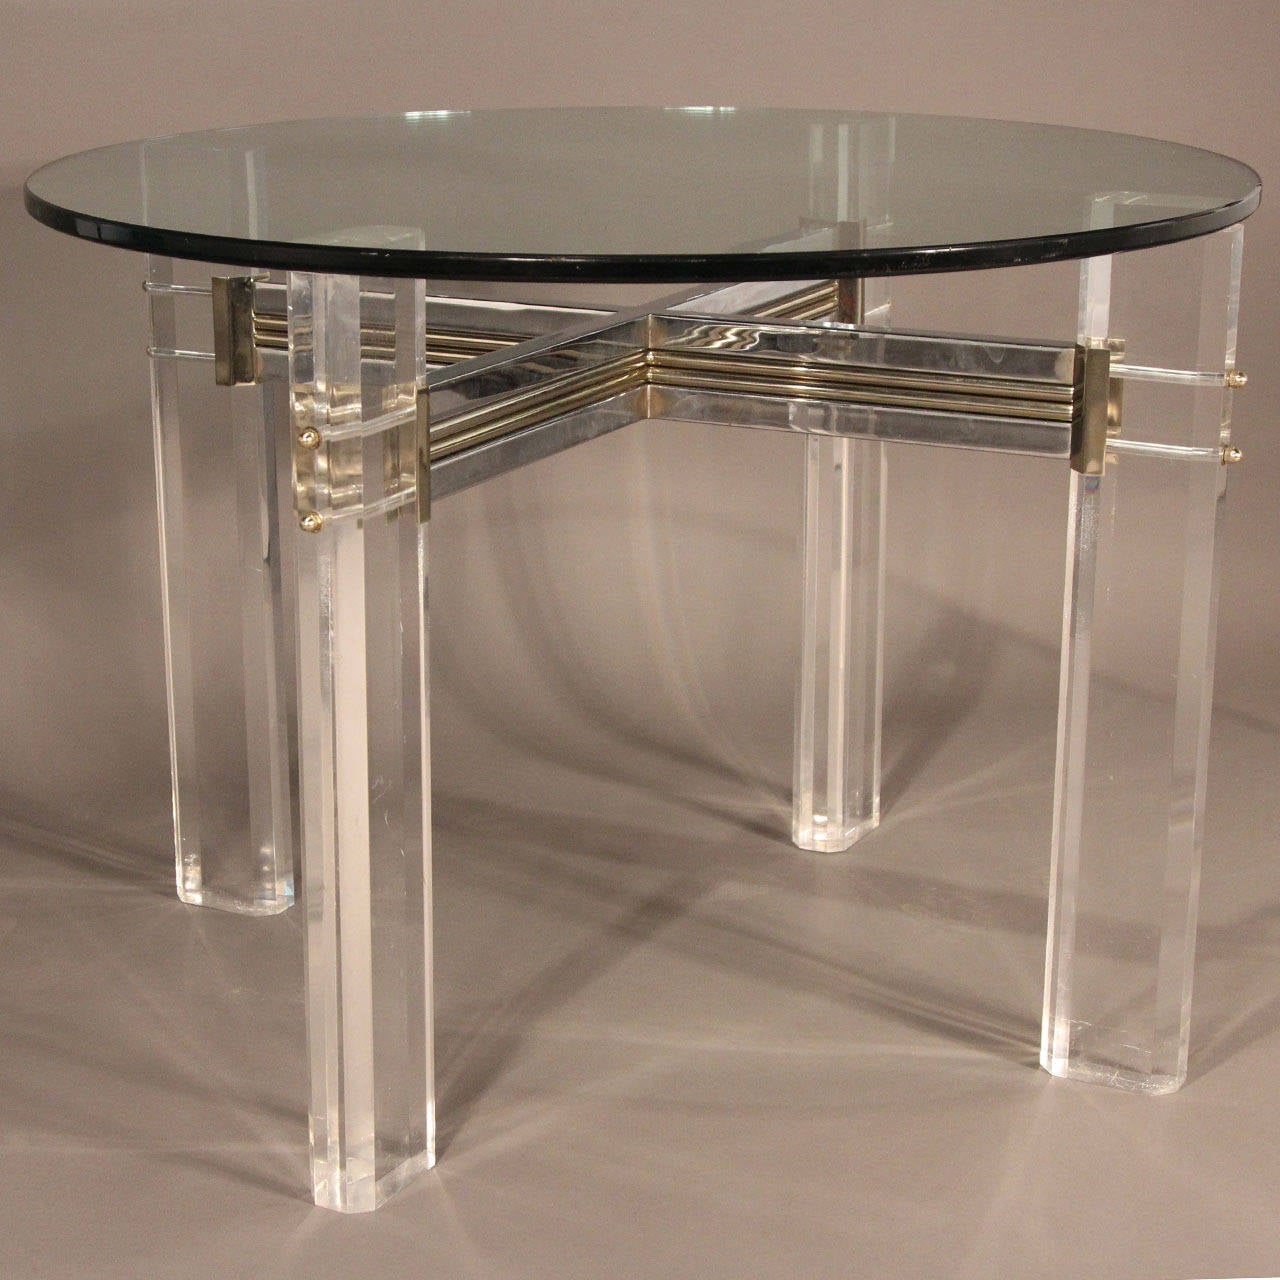 Gorgeous, very unique, Lucite dining table base with chrome and brass crossing hardware. Shown with 1 inch glass top. Can hold up to 60